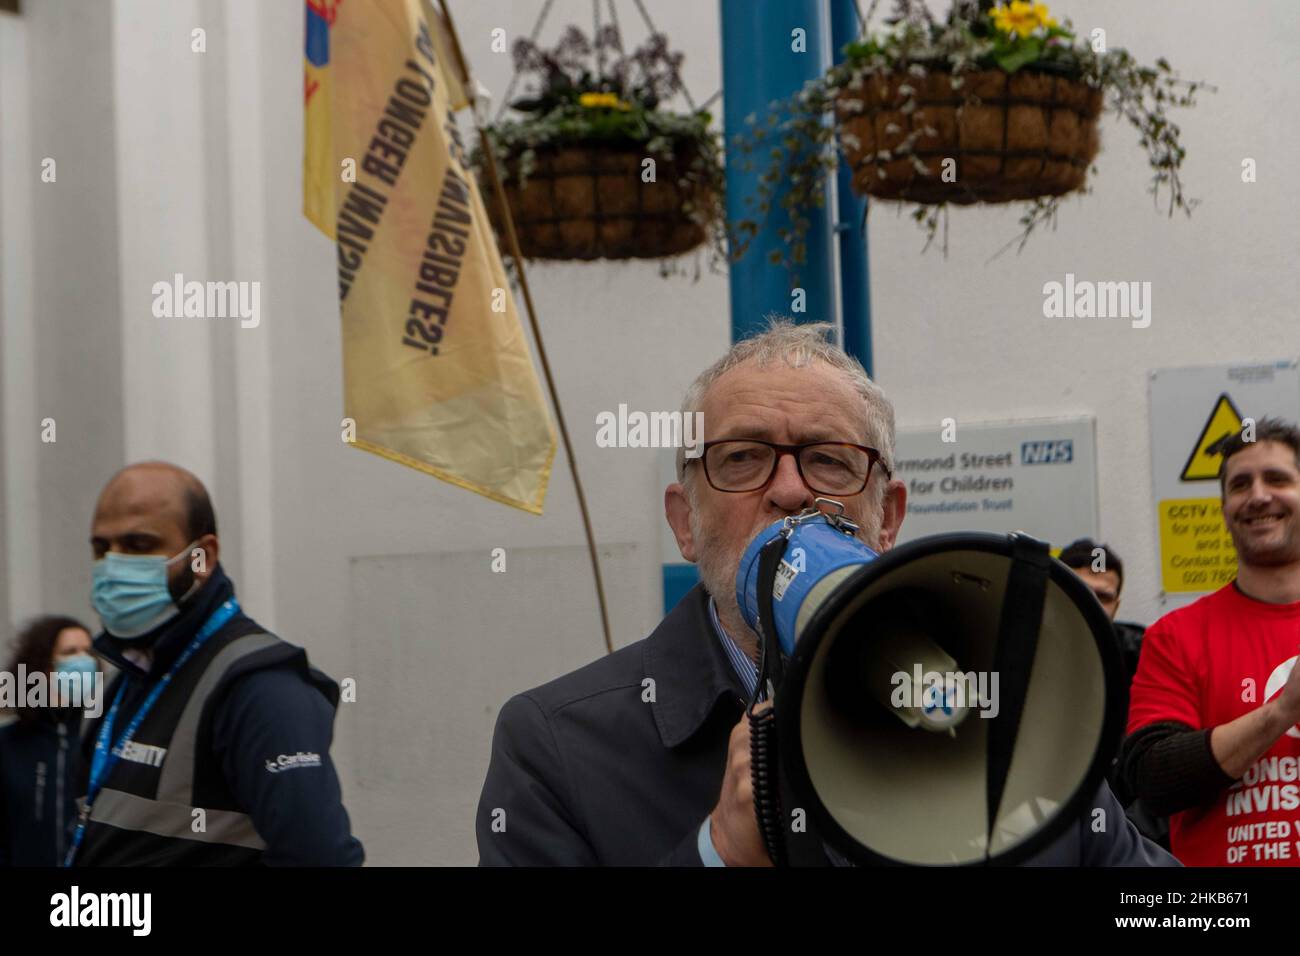 London, UK. 3rd Feb, 2022. Protest outside Great Ormand Street Children's Hospital by security guards working for a private company allegedly on worse terms than NHS staff at the hospital. Jeremy Corbyn, former leader of the labour party was at the protest Credit: Ian Davidson/Alamy Live News Stock Photo